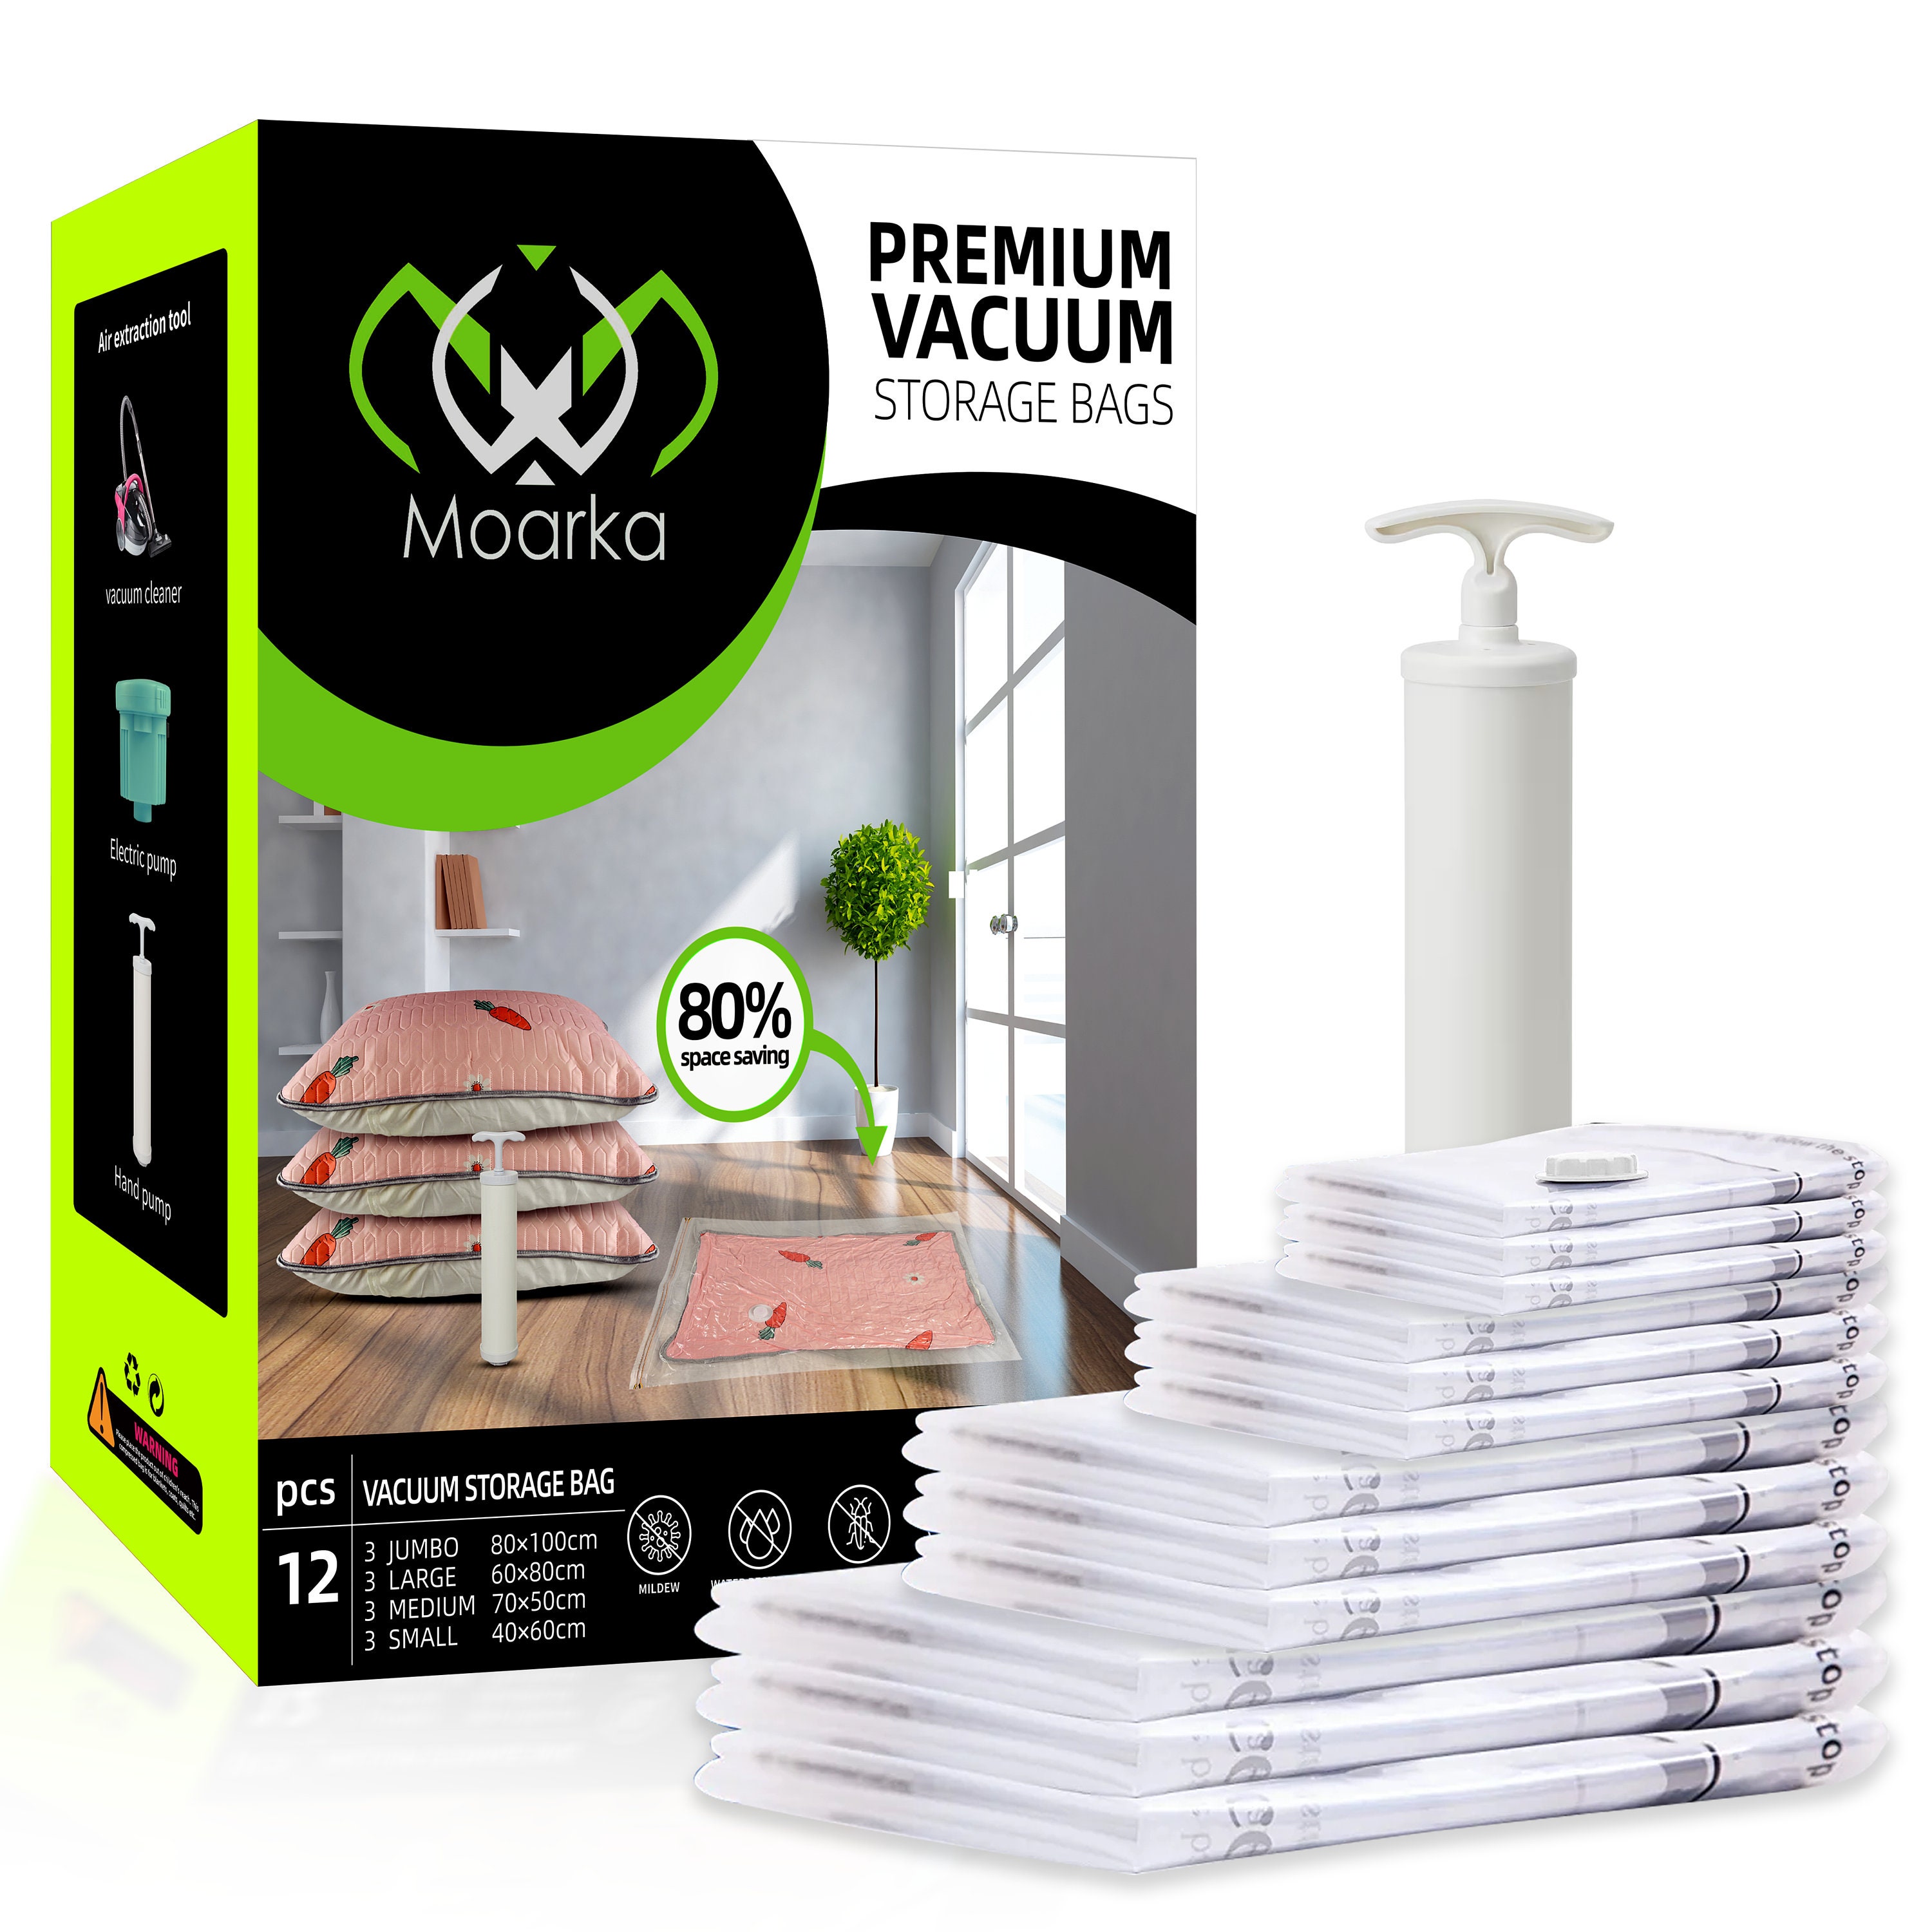 Vacuum Storage Bags, 10 Jumbo Space Saver Vacuum Seal Sealer Bags with Pump  for Clothes, Comforters, Blankets (10J)